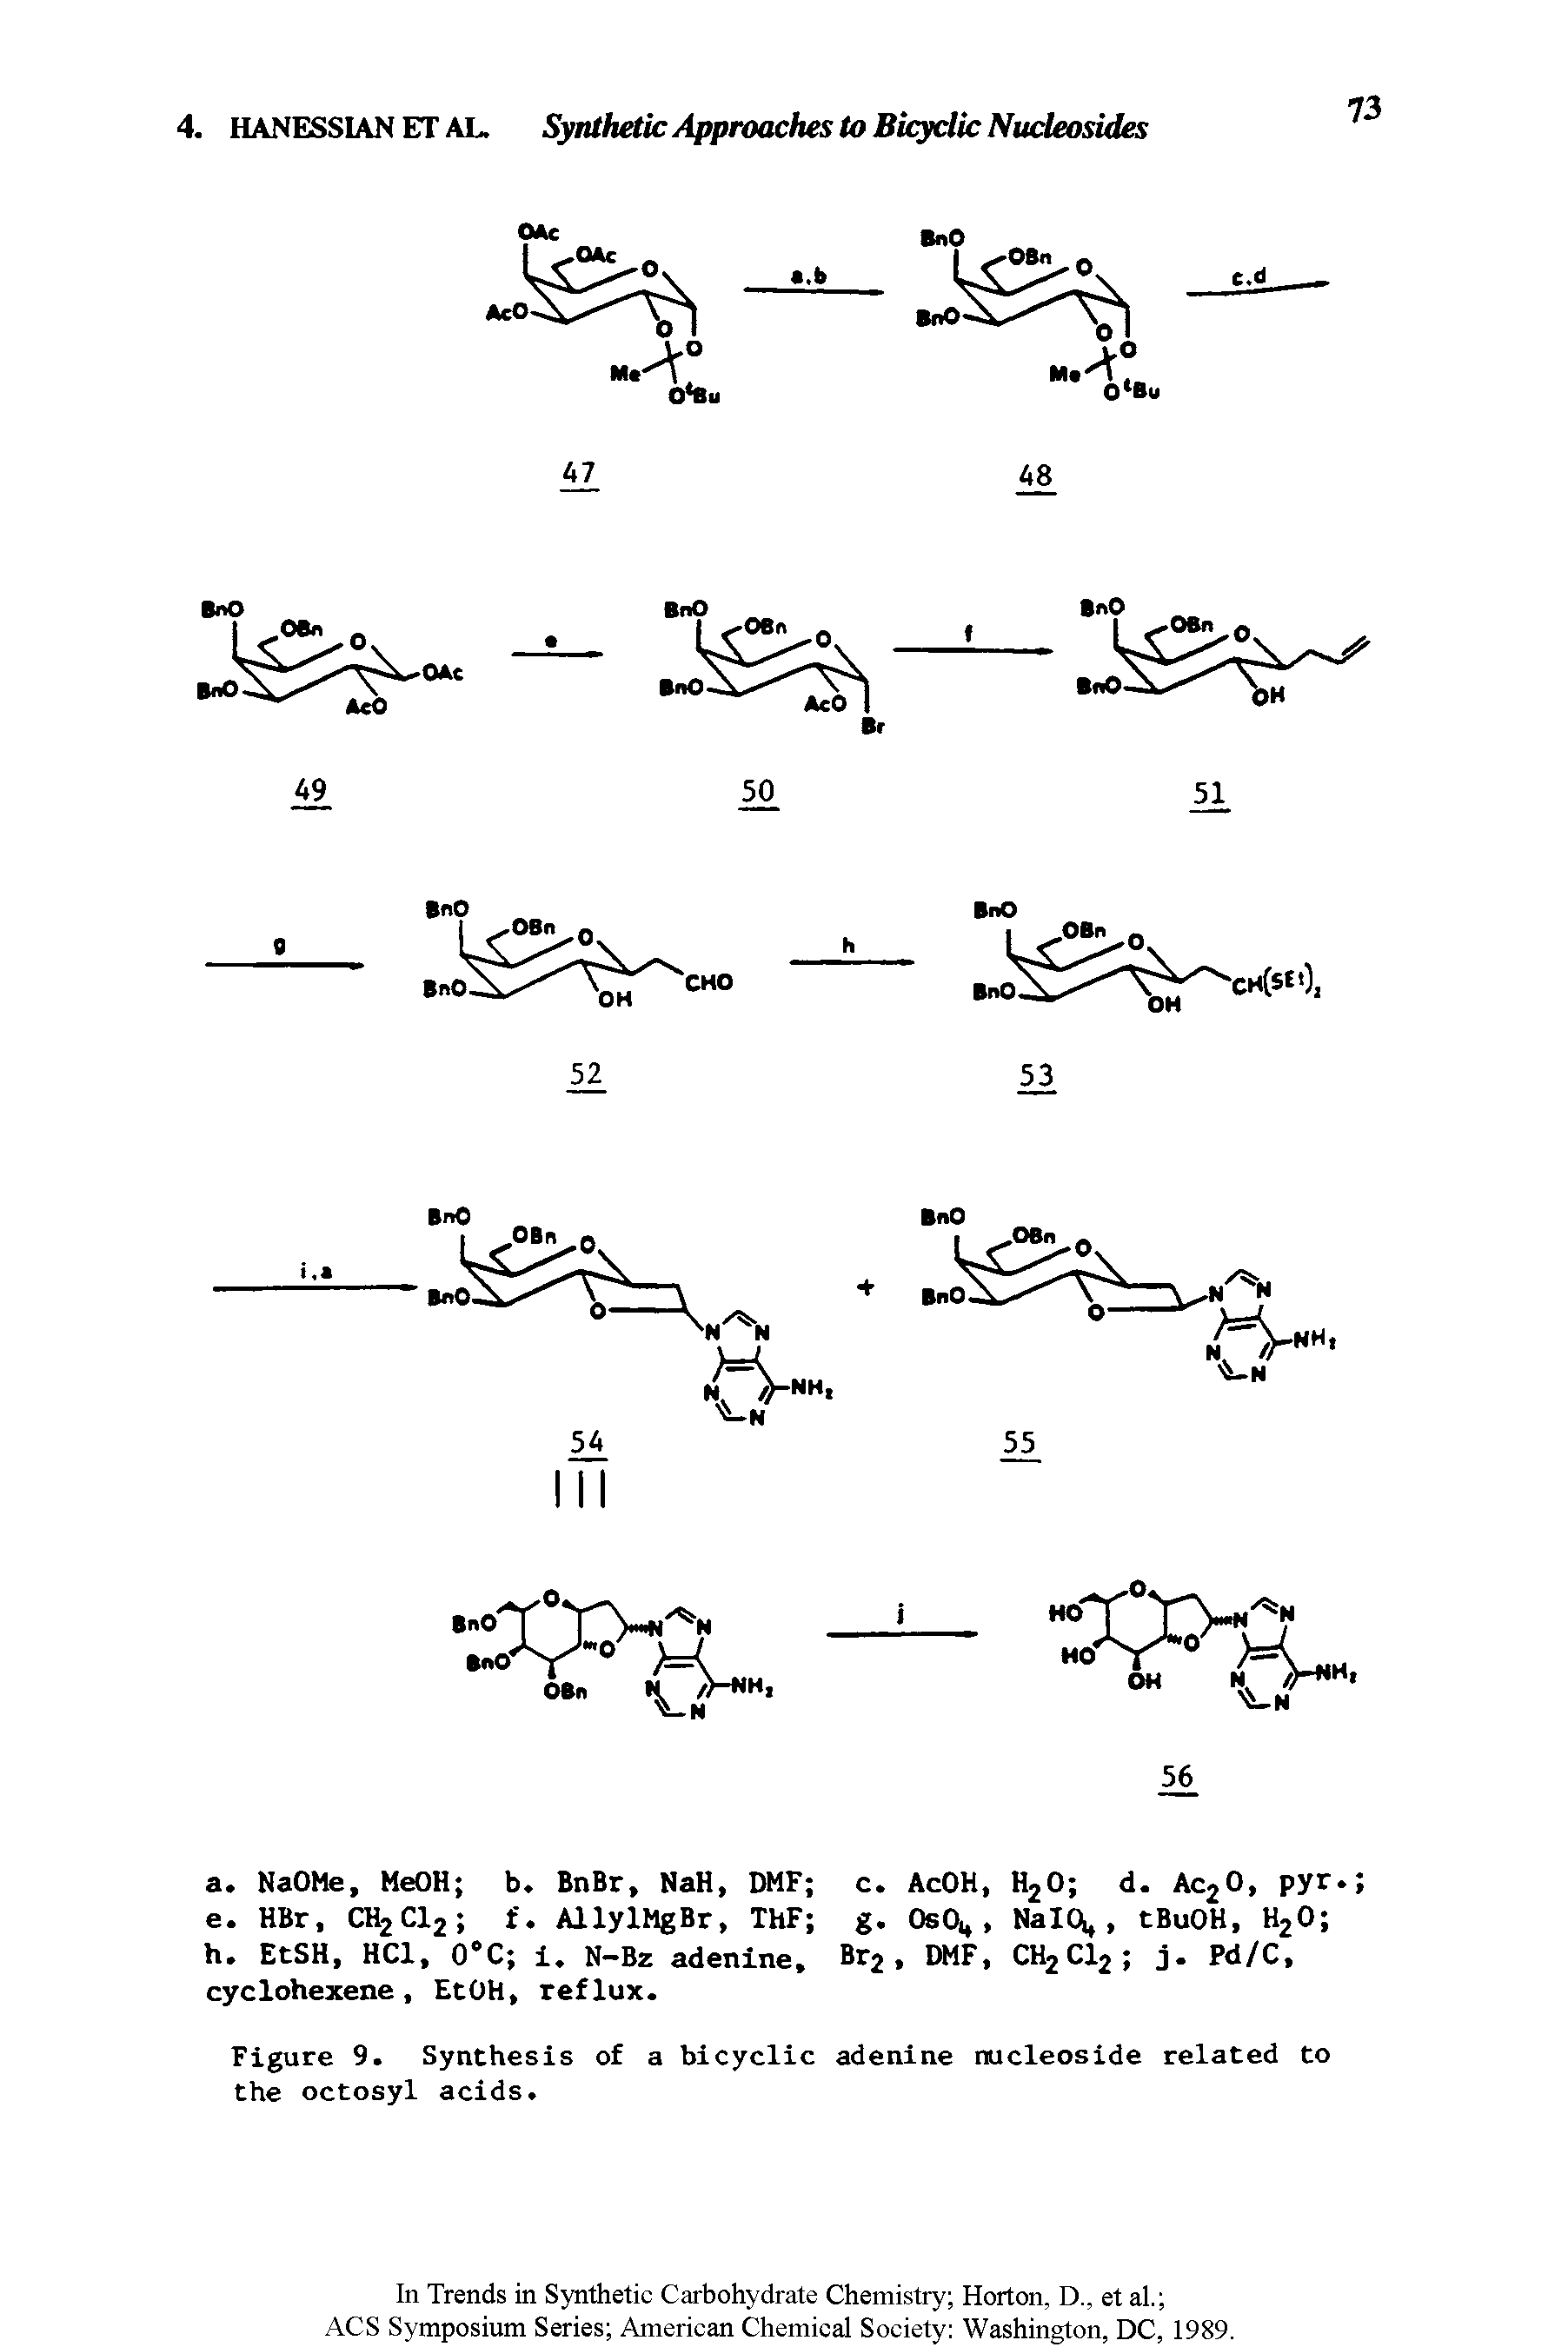 Figure 9. Synthesis of a bicyclic adenine nucleoside related to the octosyl acids.